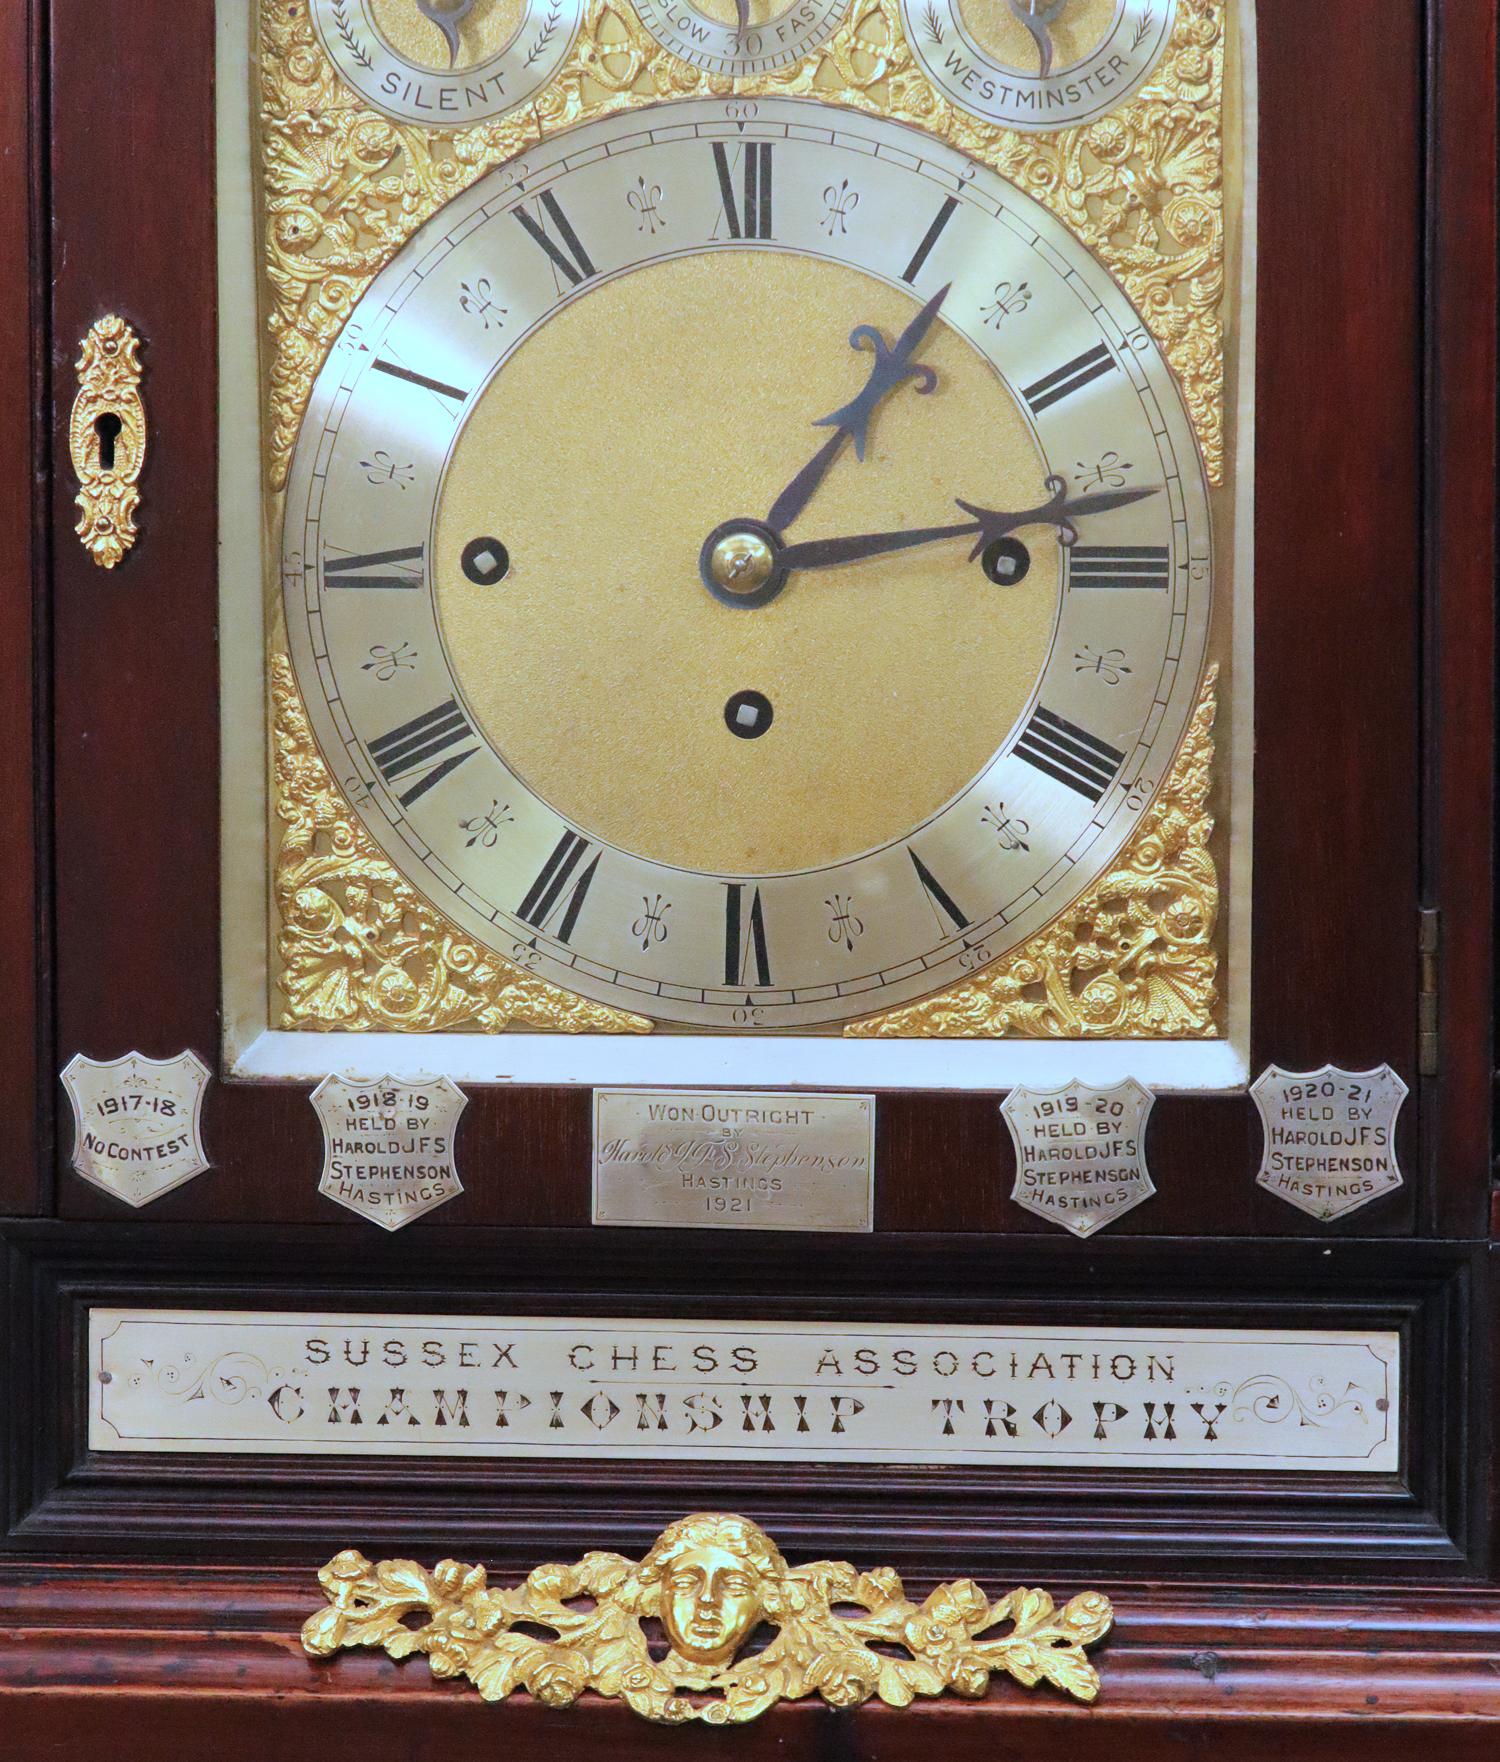 Case:	
The mahogany architectural case has decorative gilt-bronze mounts and engraved sterling silver plaques denoting the winners of the Sussex Chess Association tournaments between 1893-1921.

Dial:	
The multi-piece dial has silver chapter rings,